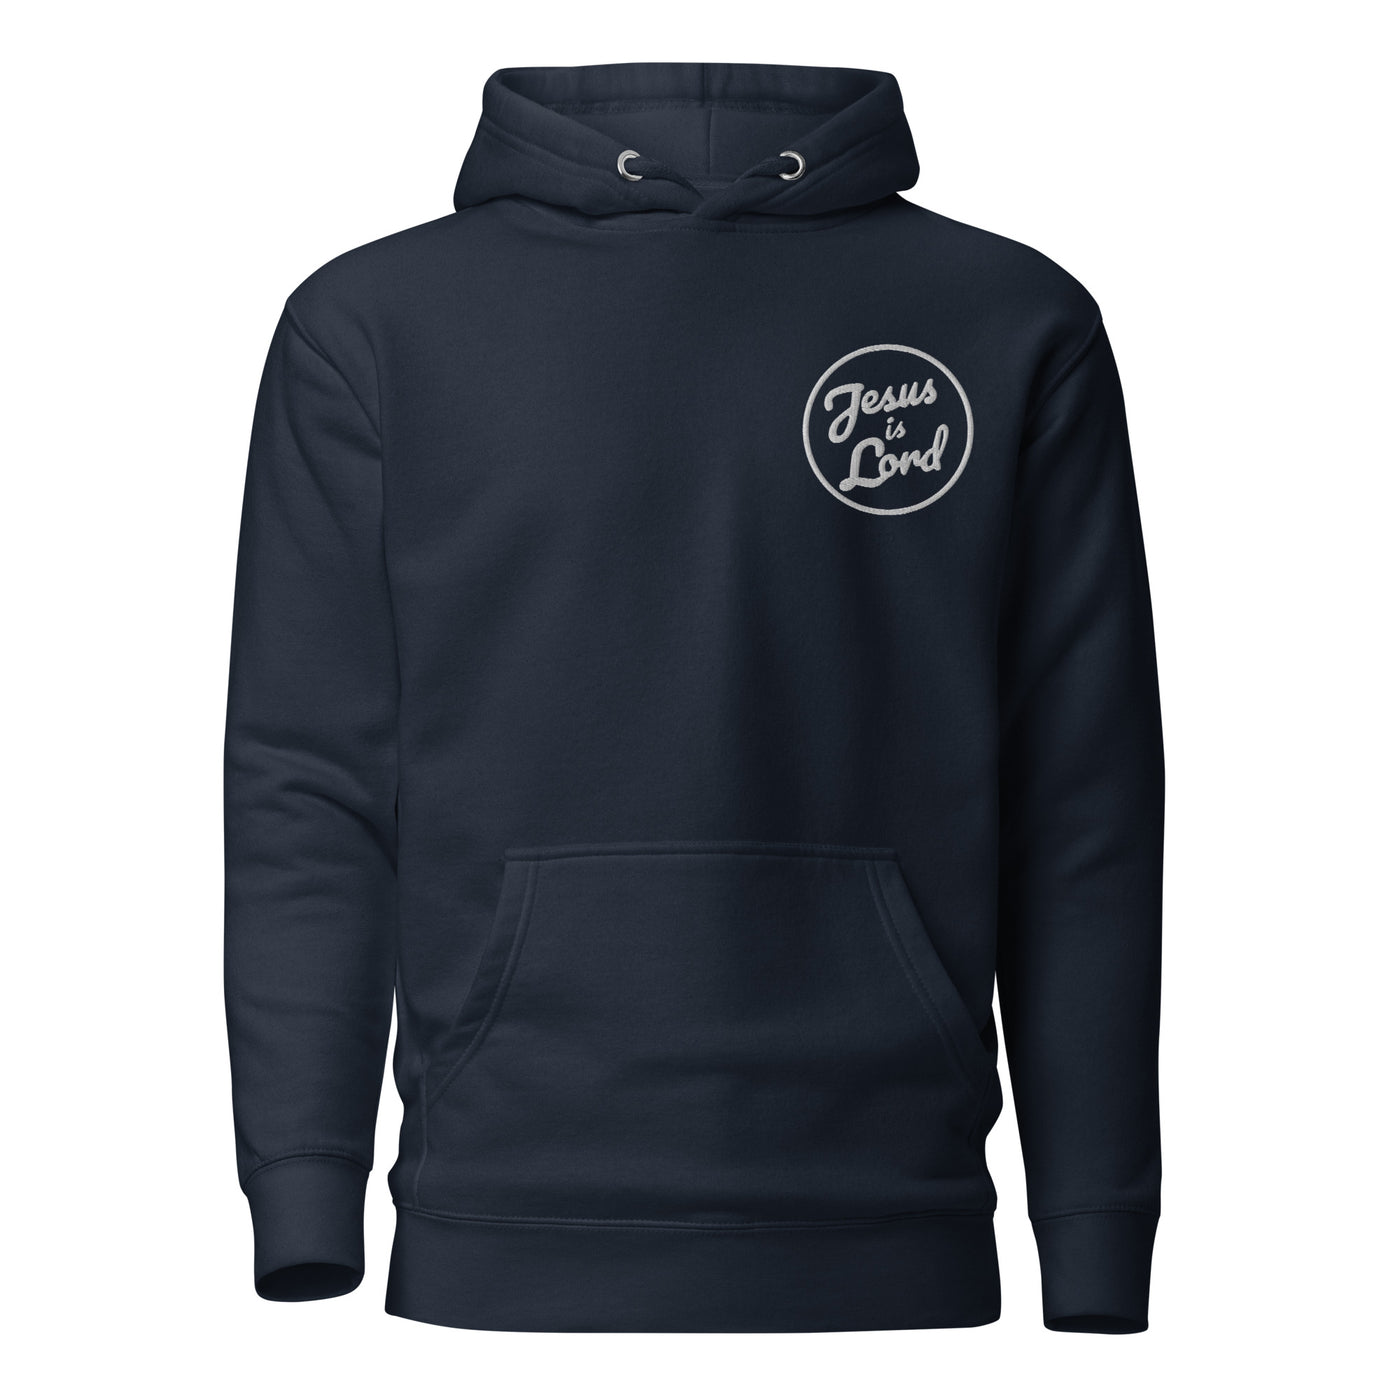 Christian Jesus is Lord Do Not Judge Two Sided Hoodie